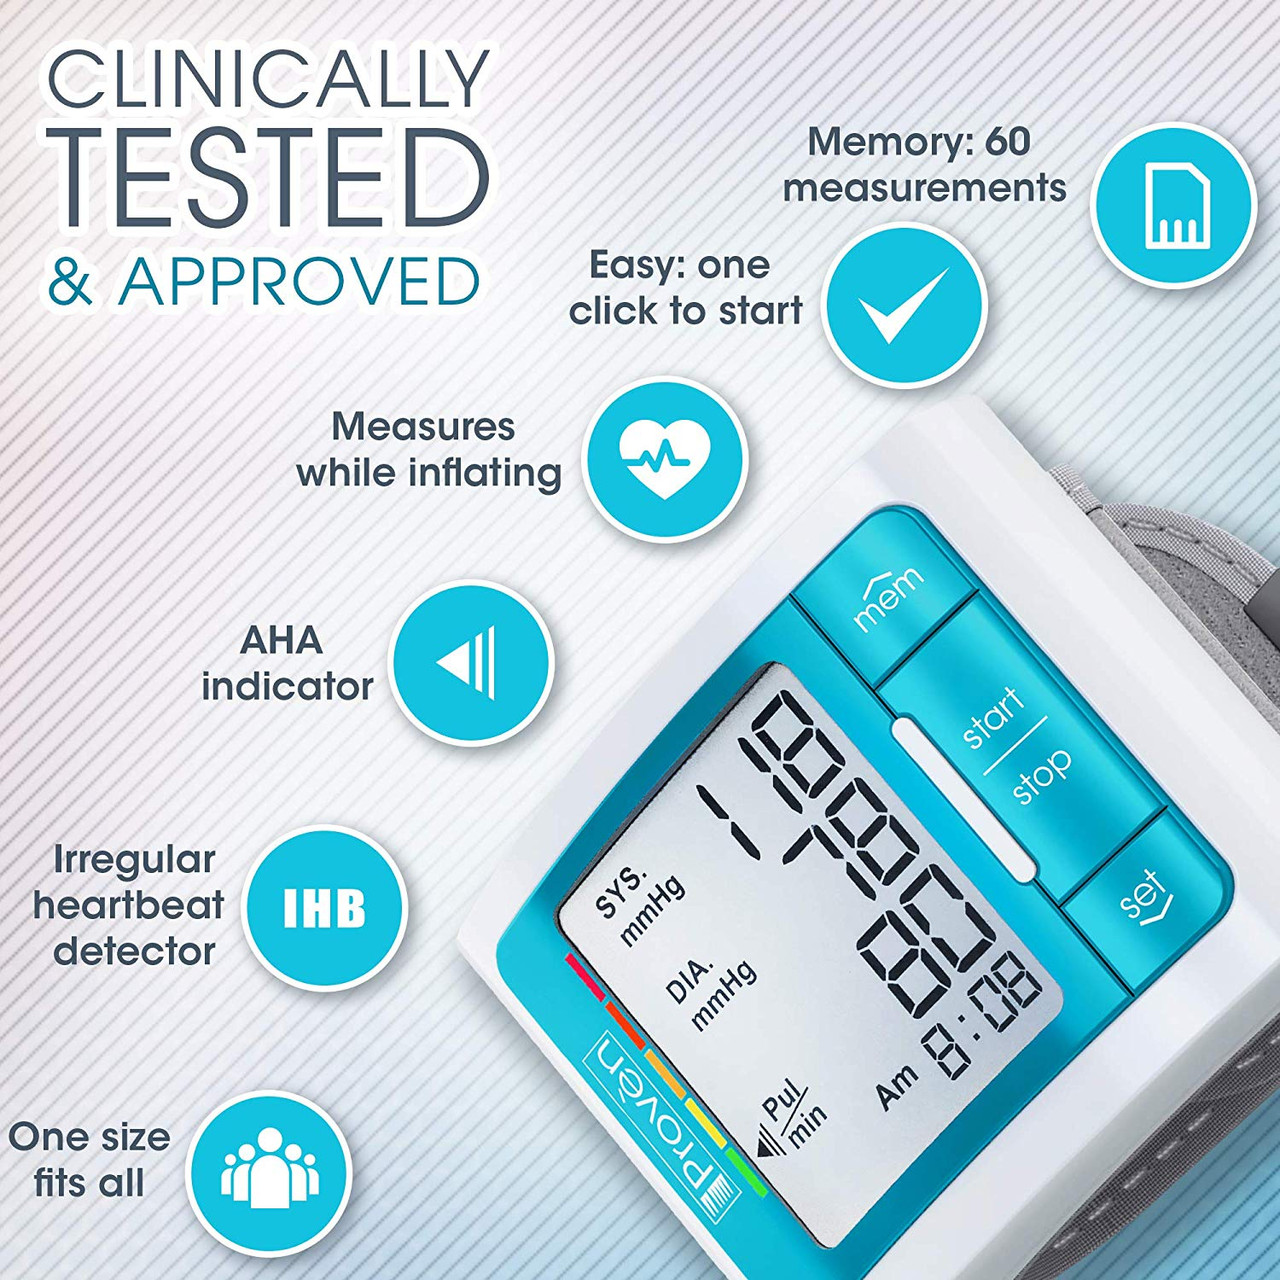 IPROVEN Wrist Blood Pressure Monitor, Large LCD Display & Portable